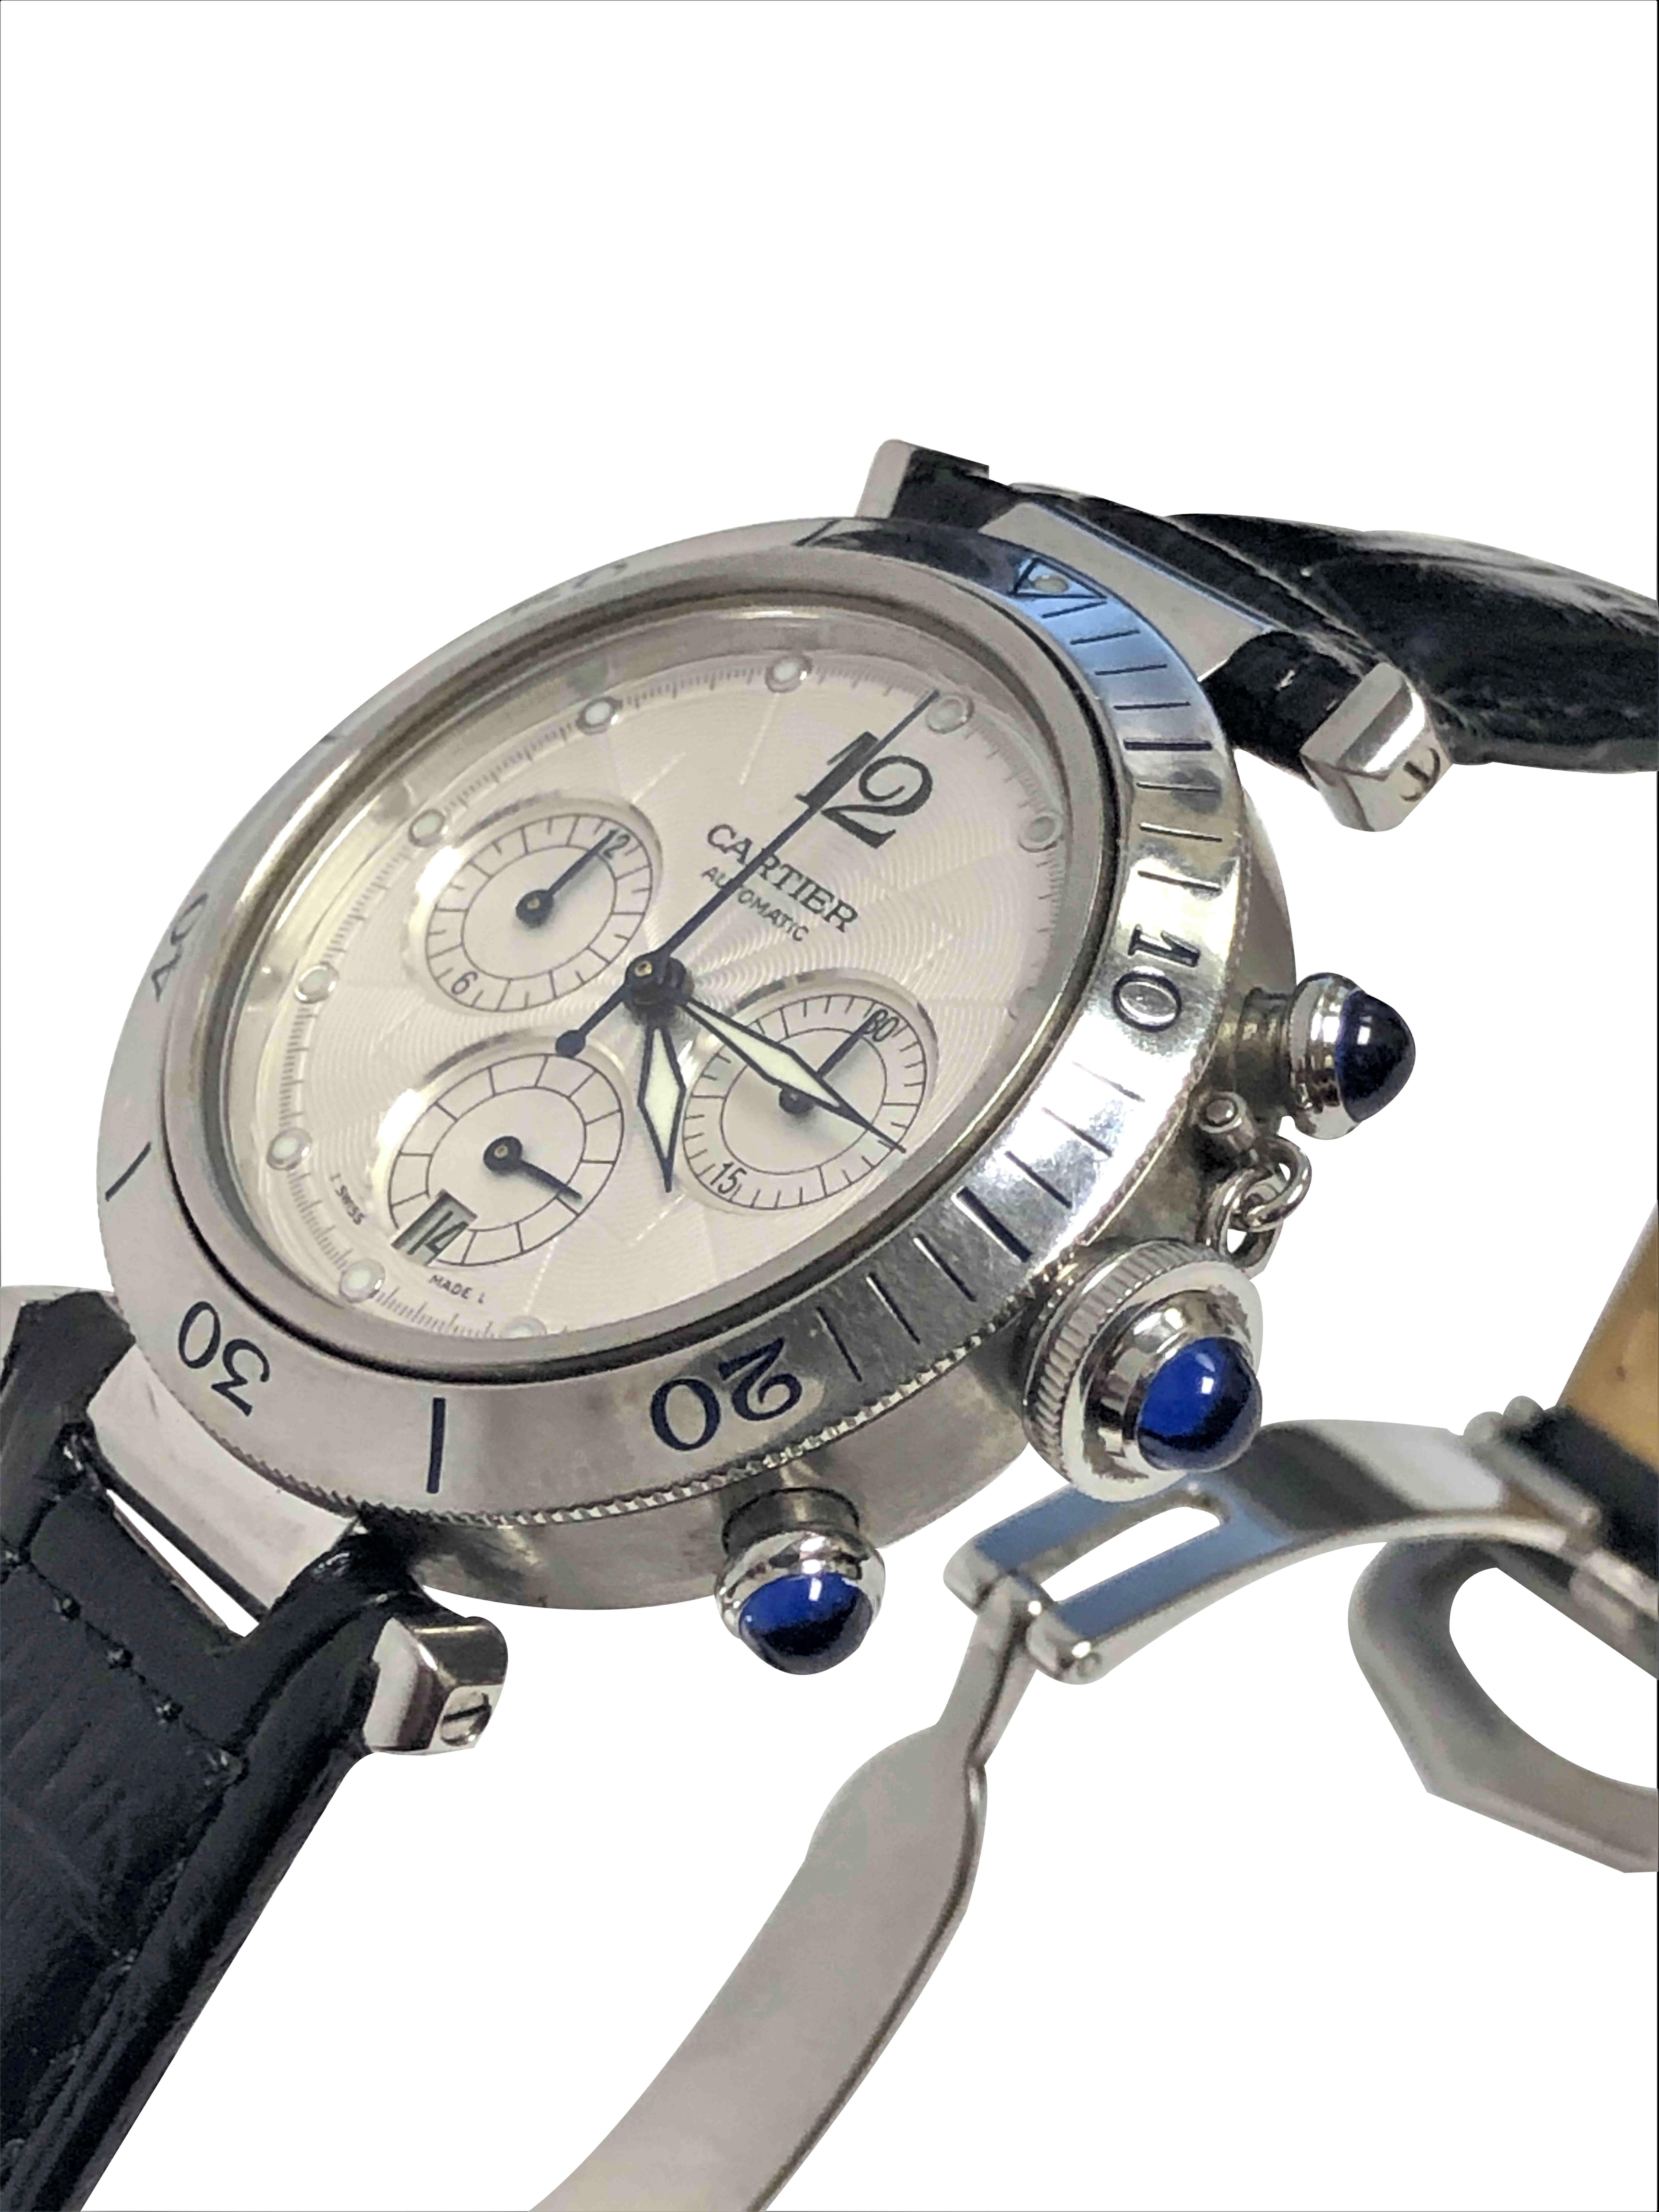 Circa 2000 Cartier Reference 2113 Pasha Chronograph, 38 M.M. Stainless Steel Water resistant case with glass Exhibition back and Rotating Bezel. 37 Jewel, Automatic self winding movement. Sapphire Chronograph Buttons and a Sapphire Lock Down water